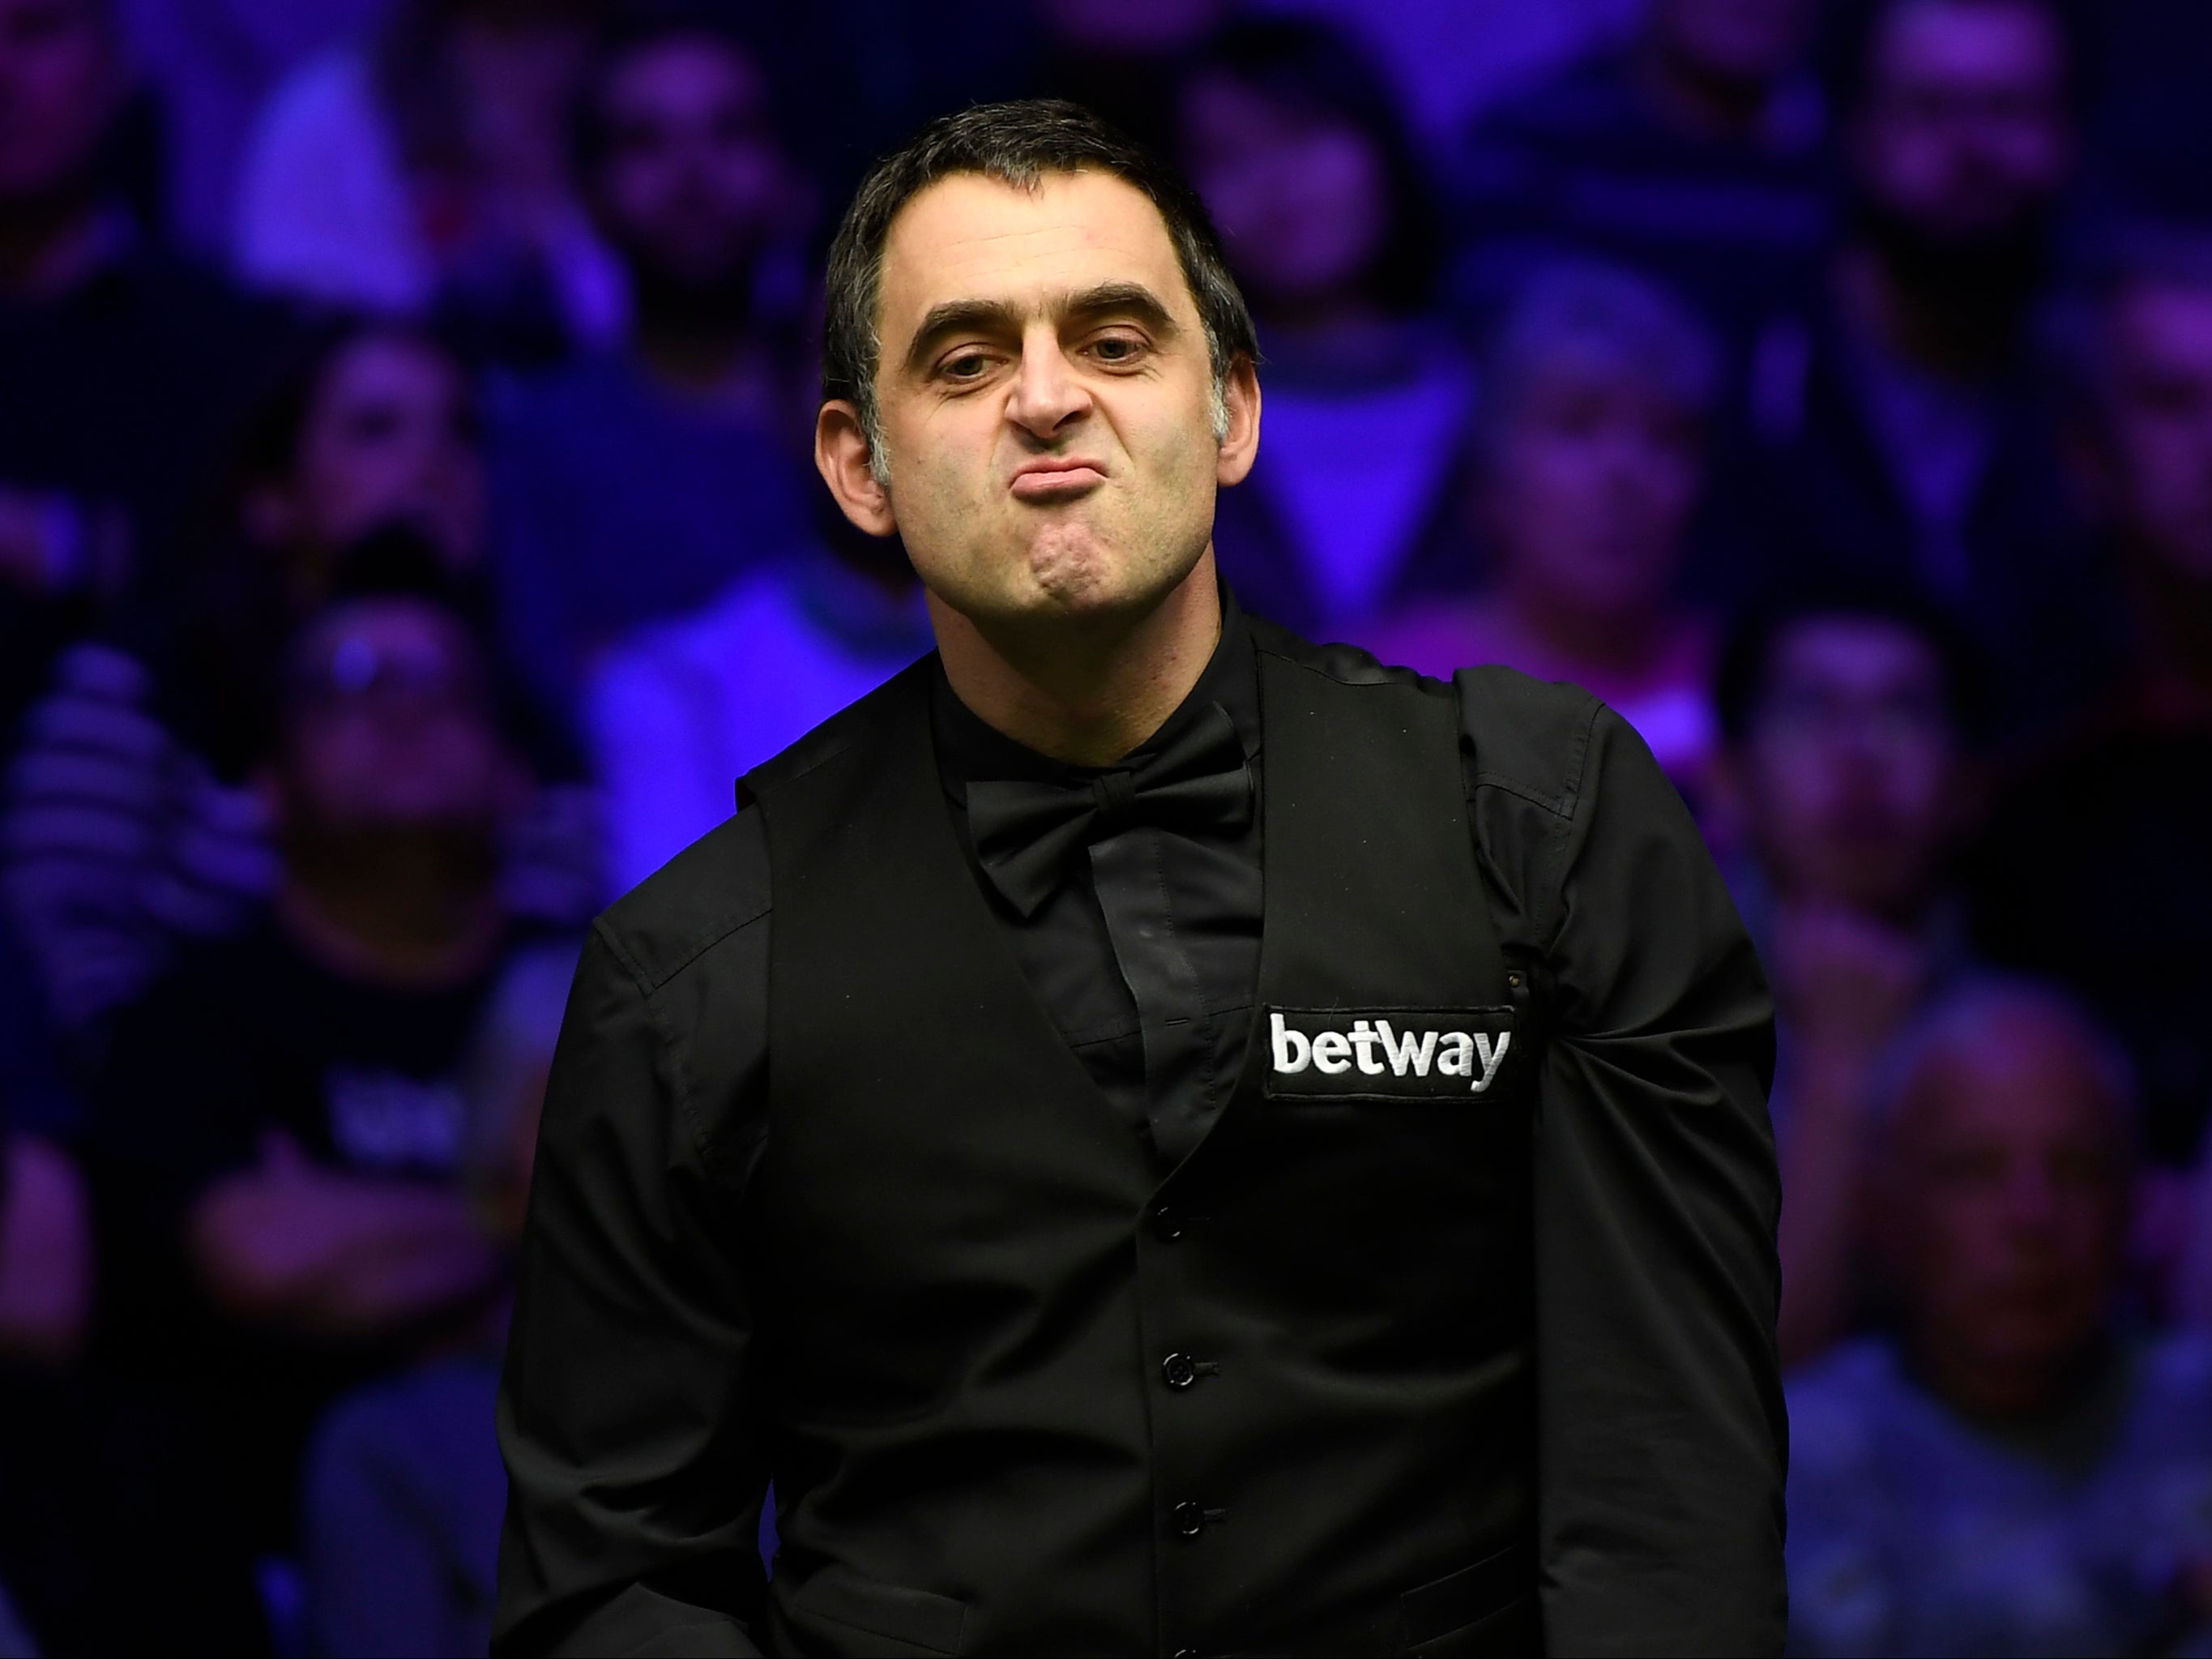 Ronnie O'Sullivan was stunned by the young opponent